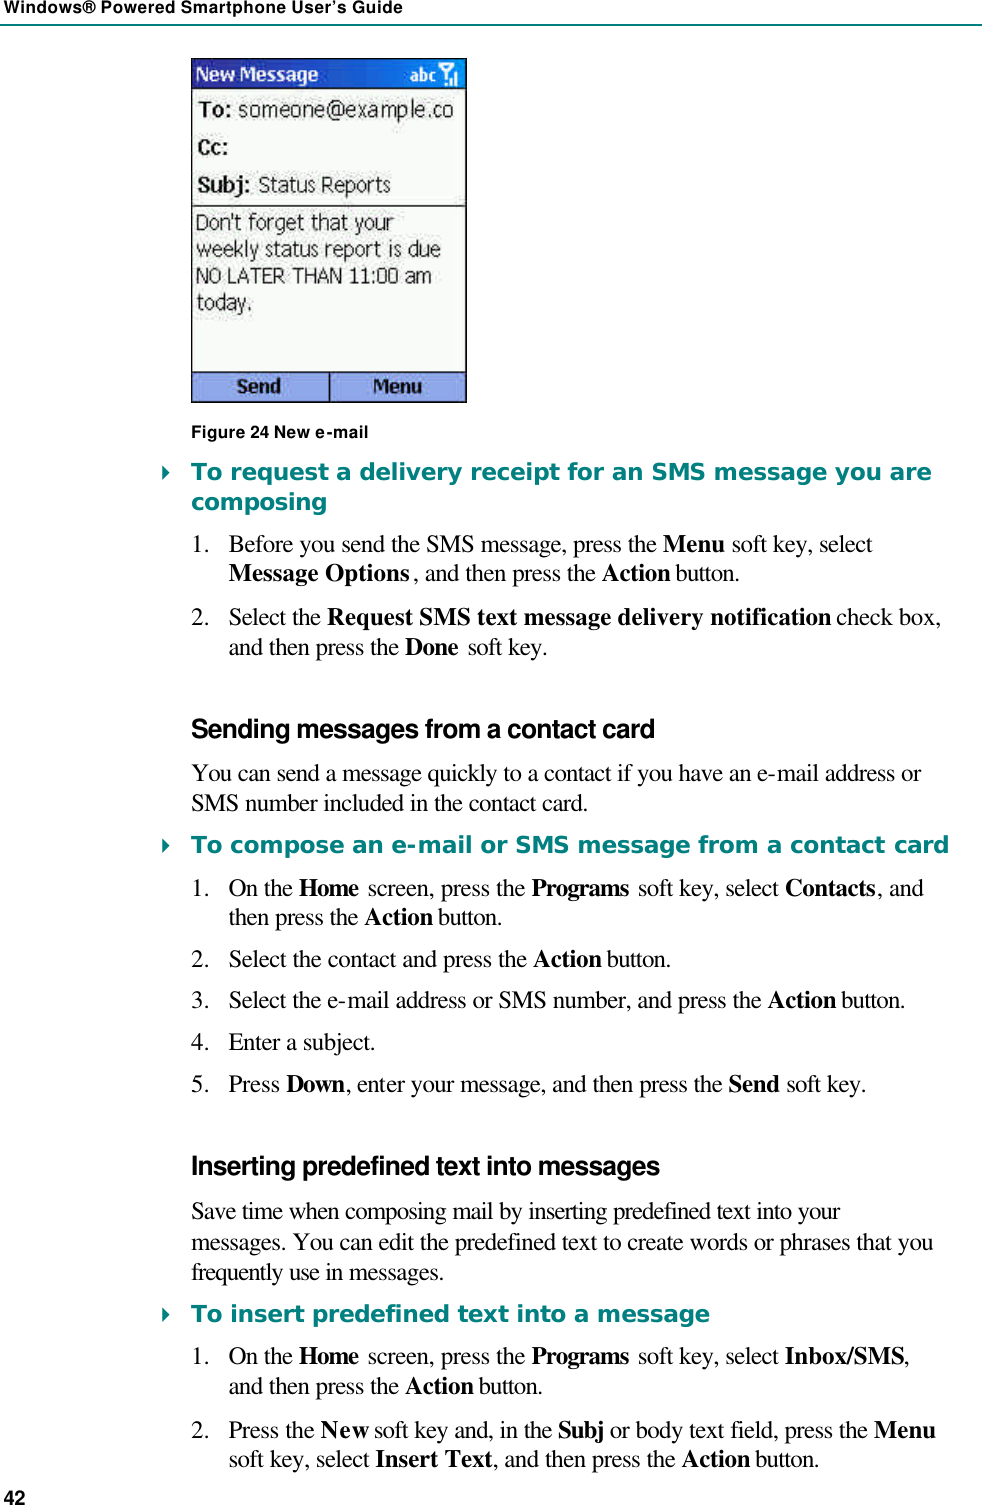 Windows® Powered Smartphone User’s Guide 42  Figure 24 New e-mail 4 To request a delivery receipt for an SMS message you are composing 1.  Before you send the SMS message, press the Menu soft key, select Message Options, and then press the Action button. 2.  Select the Request SMS text message delivery notification check box, and then press the Done soft key. Sending messages from a contact card You can send a message quickly to a contact if you have an e-mail address or SMS number included in the contact card. 4 To compose an e-mail or SMS message from a contact card 1.  On the Home screen, press the Programs soft key, select Contacts, and then press the Action button. 2.  Select the contact and press the Action button. 3.  Select the e-mail address or SMS number, and press the Action button. 4.  Enter a subject. 5.  Press Down, enter your message, and then press the Send soft key. Inserting predefined text into messages Save time when composing mail by inserting predefined text into your messages. You can edit the predefined text to create words or phrases that you frequently use in messages. 4 To insert predefined text into a message 1.  On the Home screen, press the Programs soft key, select Inbox/SMS, and then press the Action button. 2.  Press the New soft key and, in the Subj or body text field, press the Menu soft key, select Insert Text, and then press the Action button. 